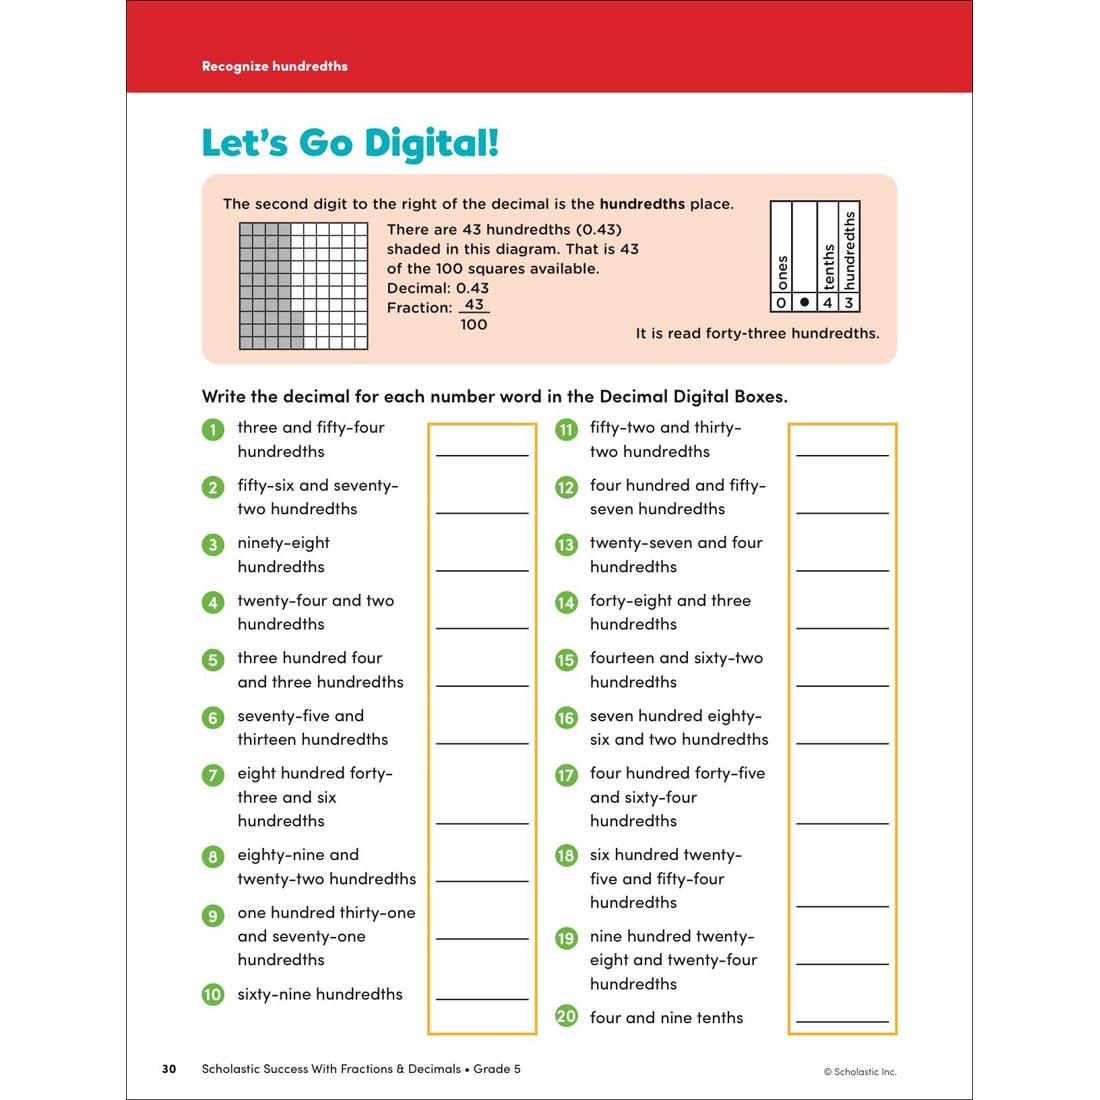 page 30 of Scholastic Success With Fractions & Decimals Workbook Grade 5